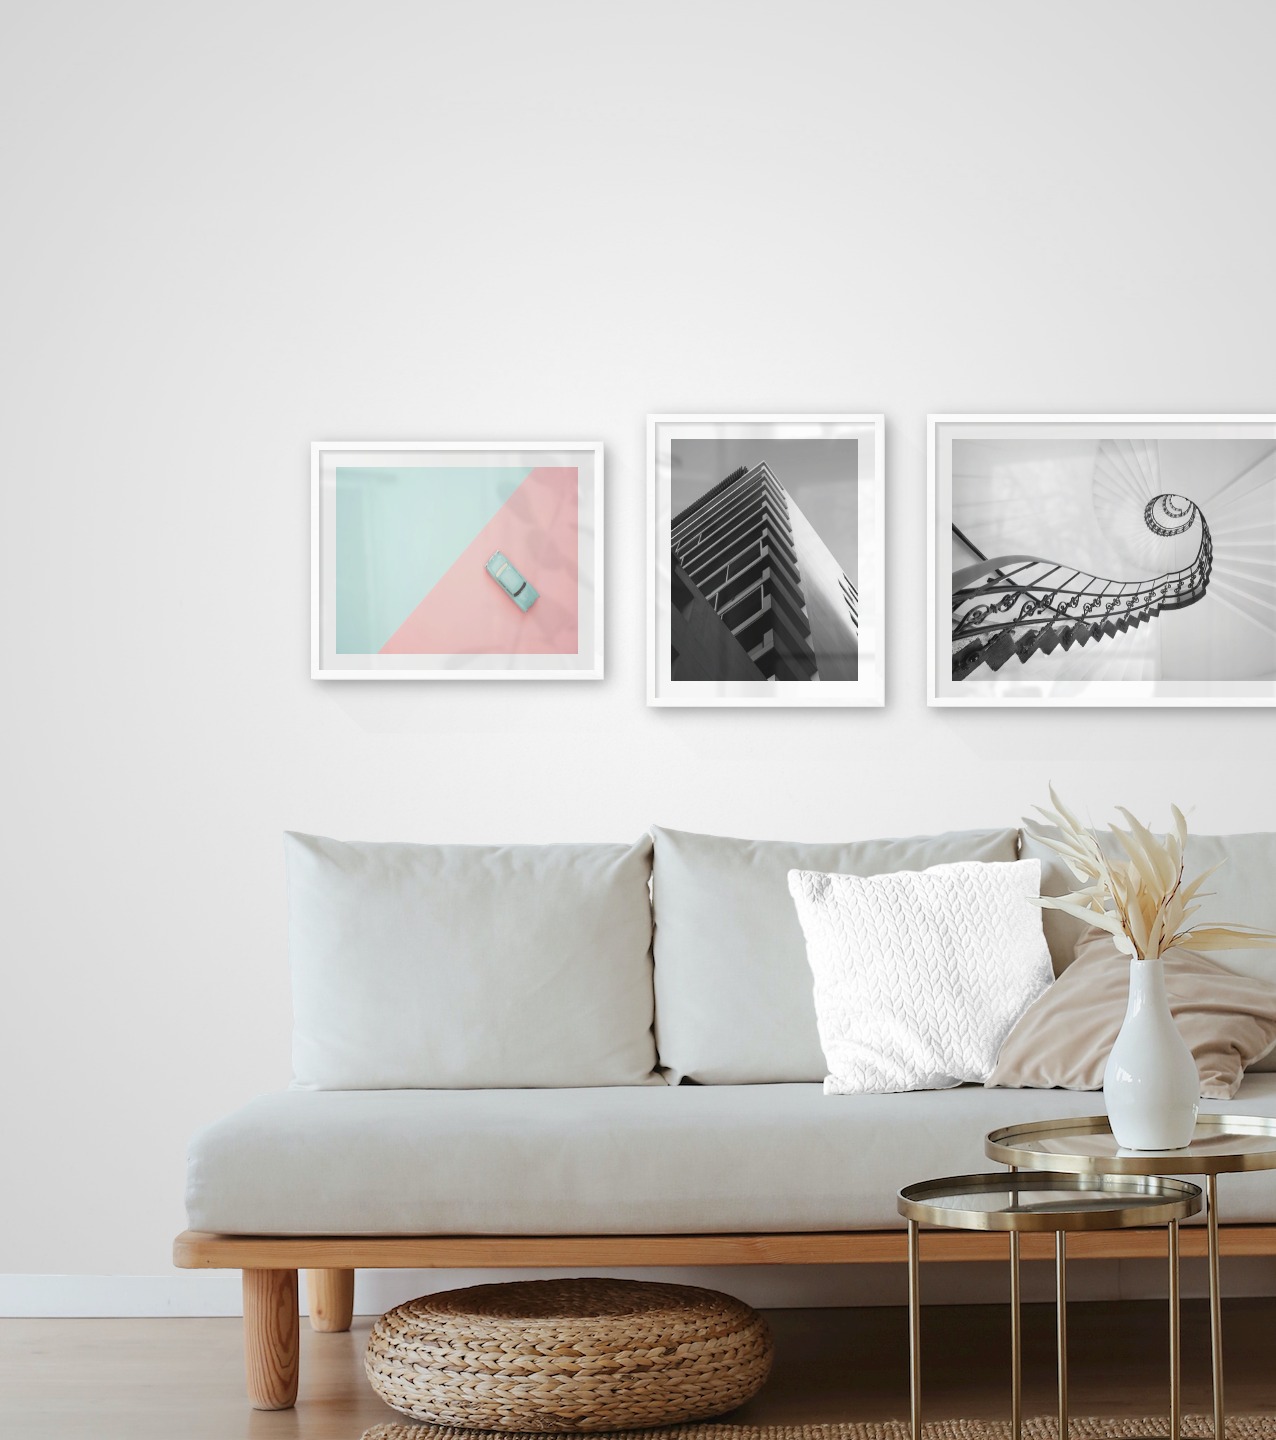 Gallery wall with picture frames in white in sizes 40x50 and 50x70 with prints "Blue car and pink", "Black and white building" and "Circular stair railing"